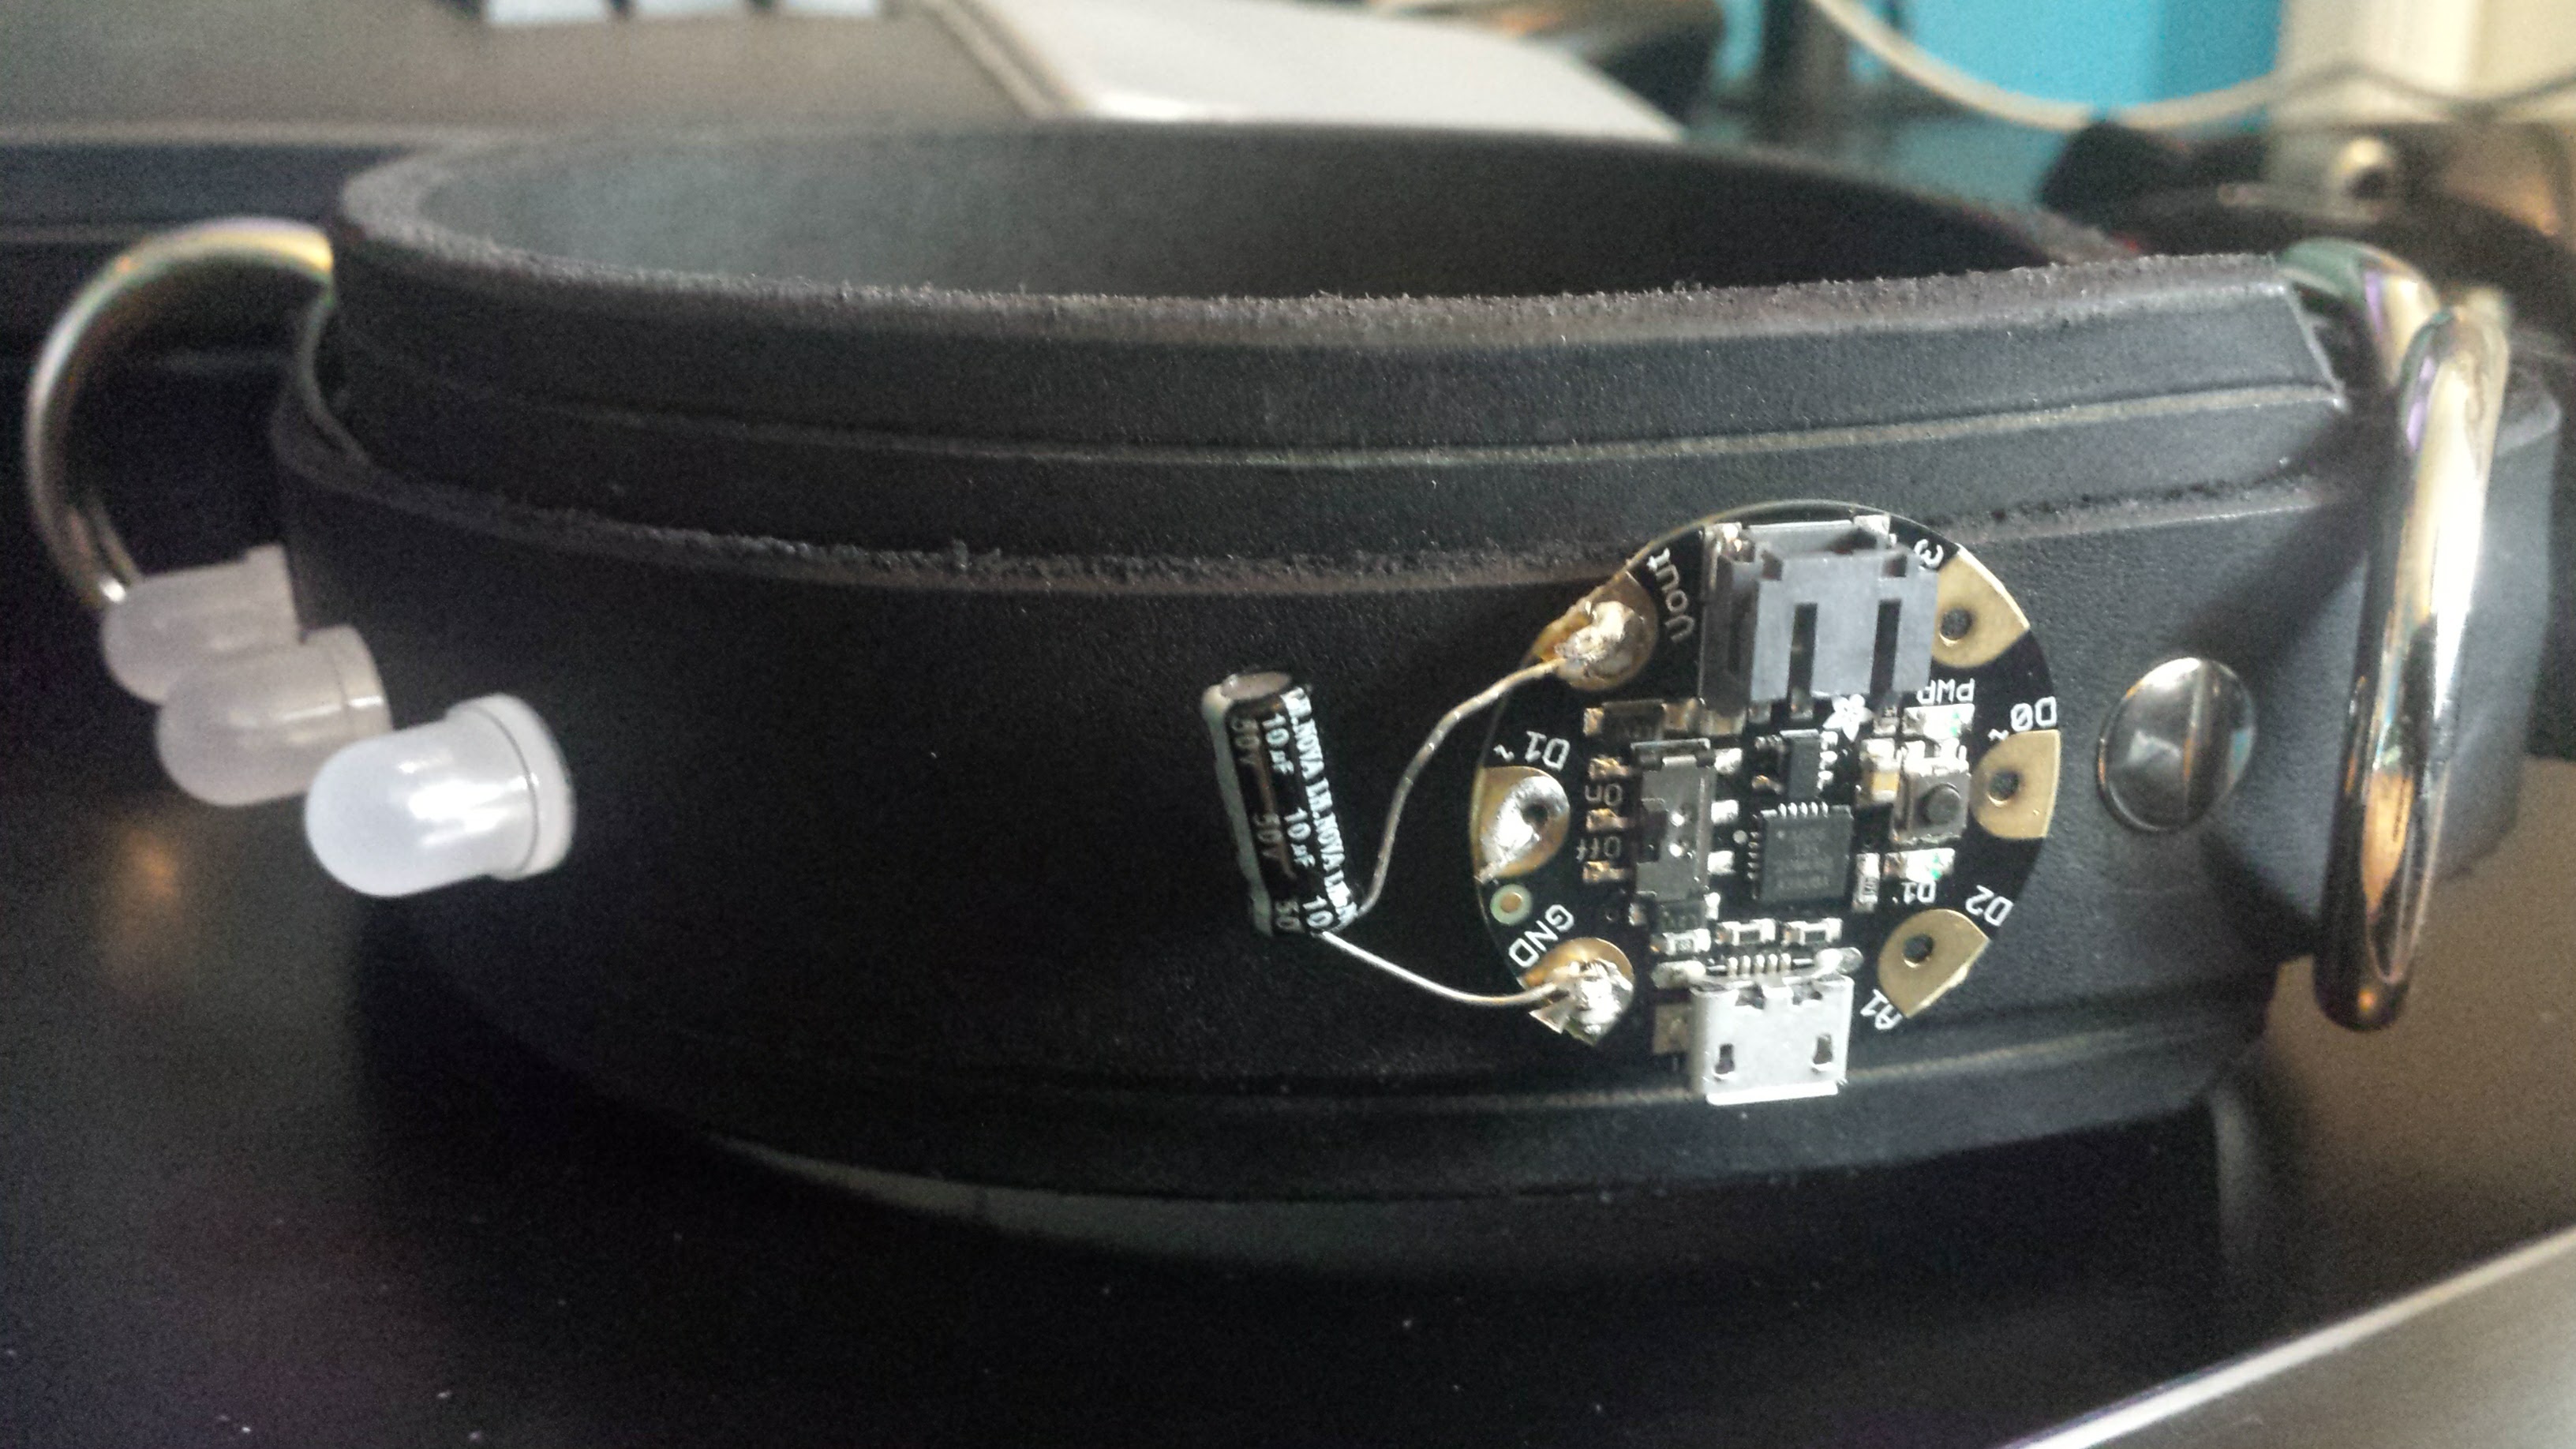 A close up of the microcontroller mounted on the collar.